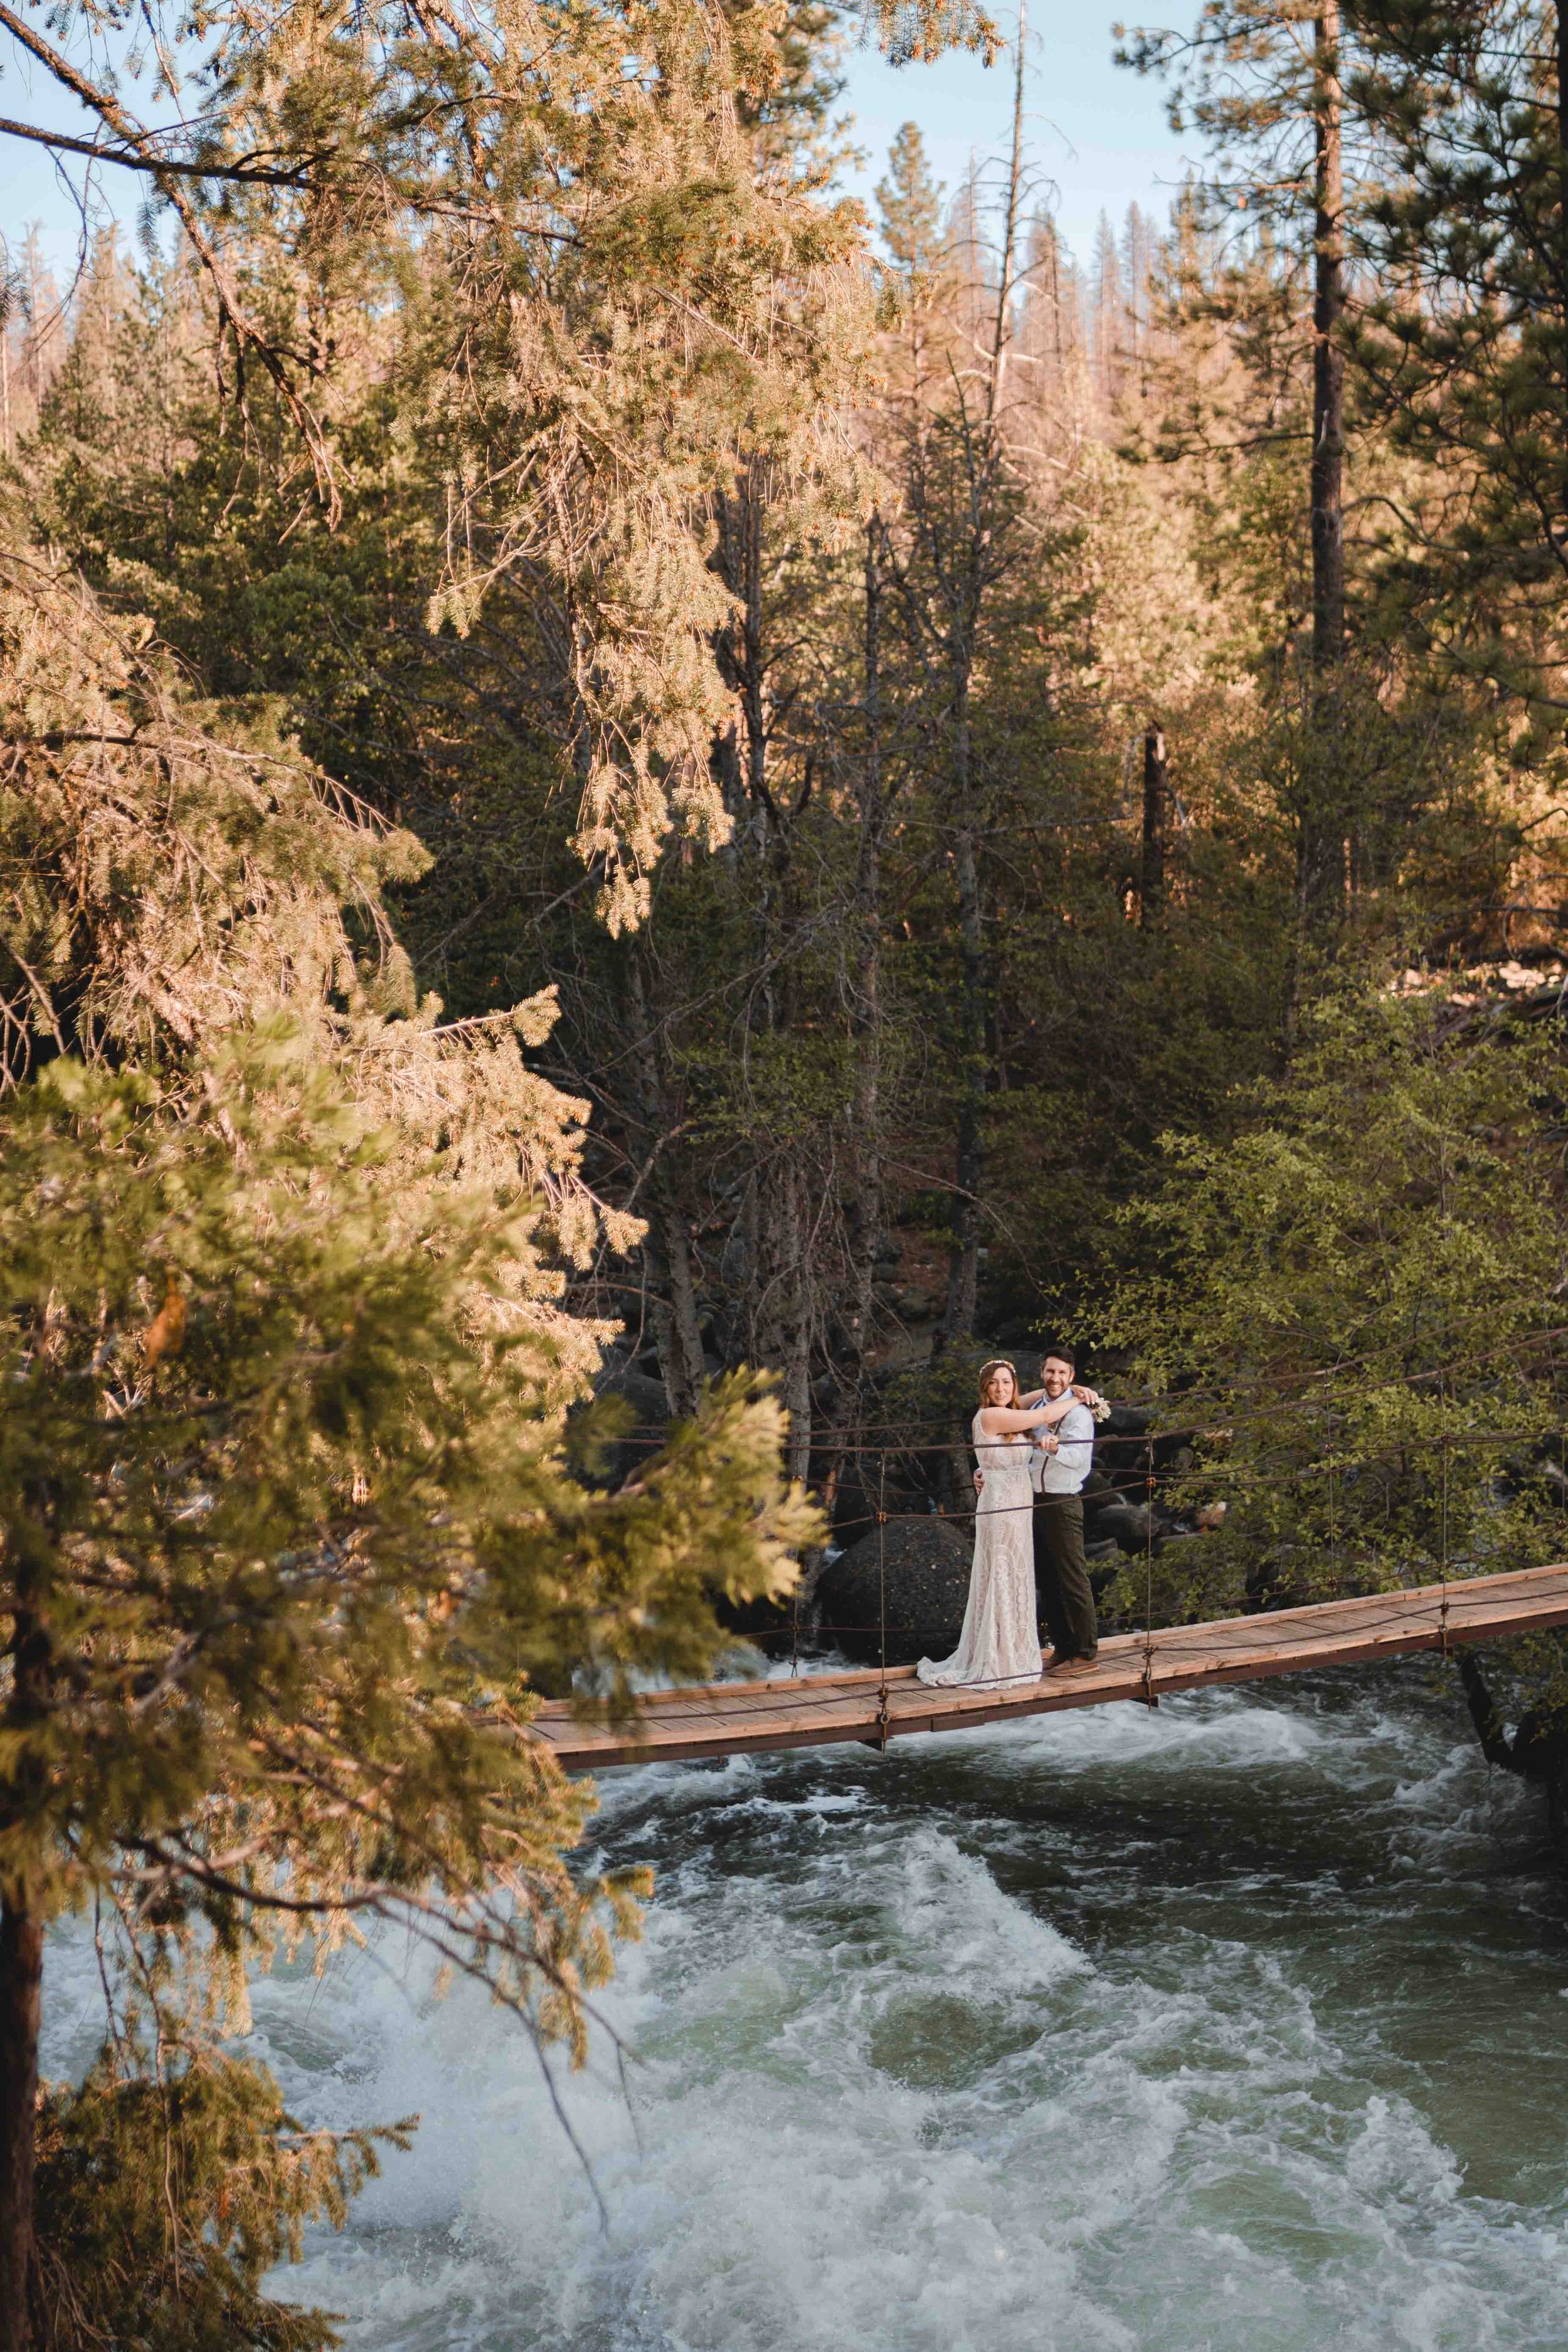 Newly weds standing on a bridge at sunset